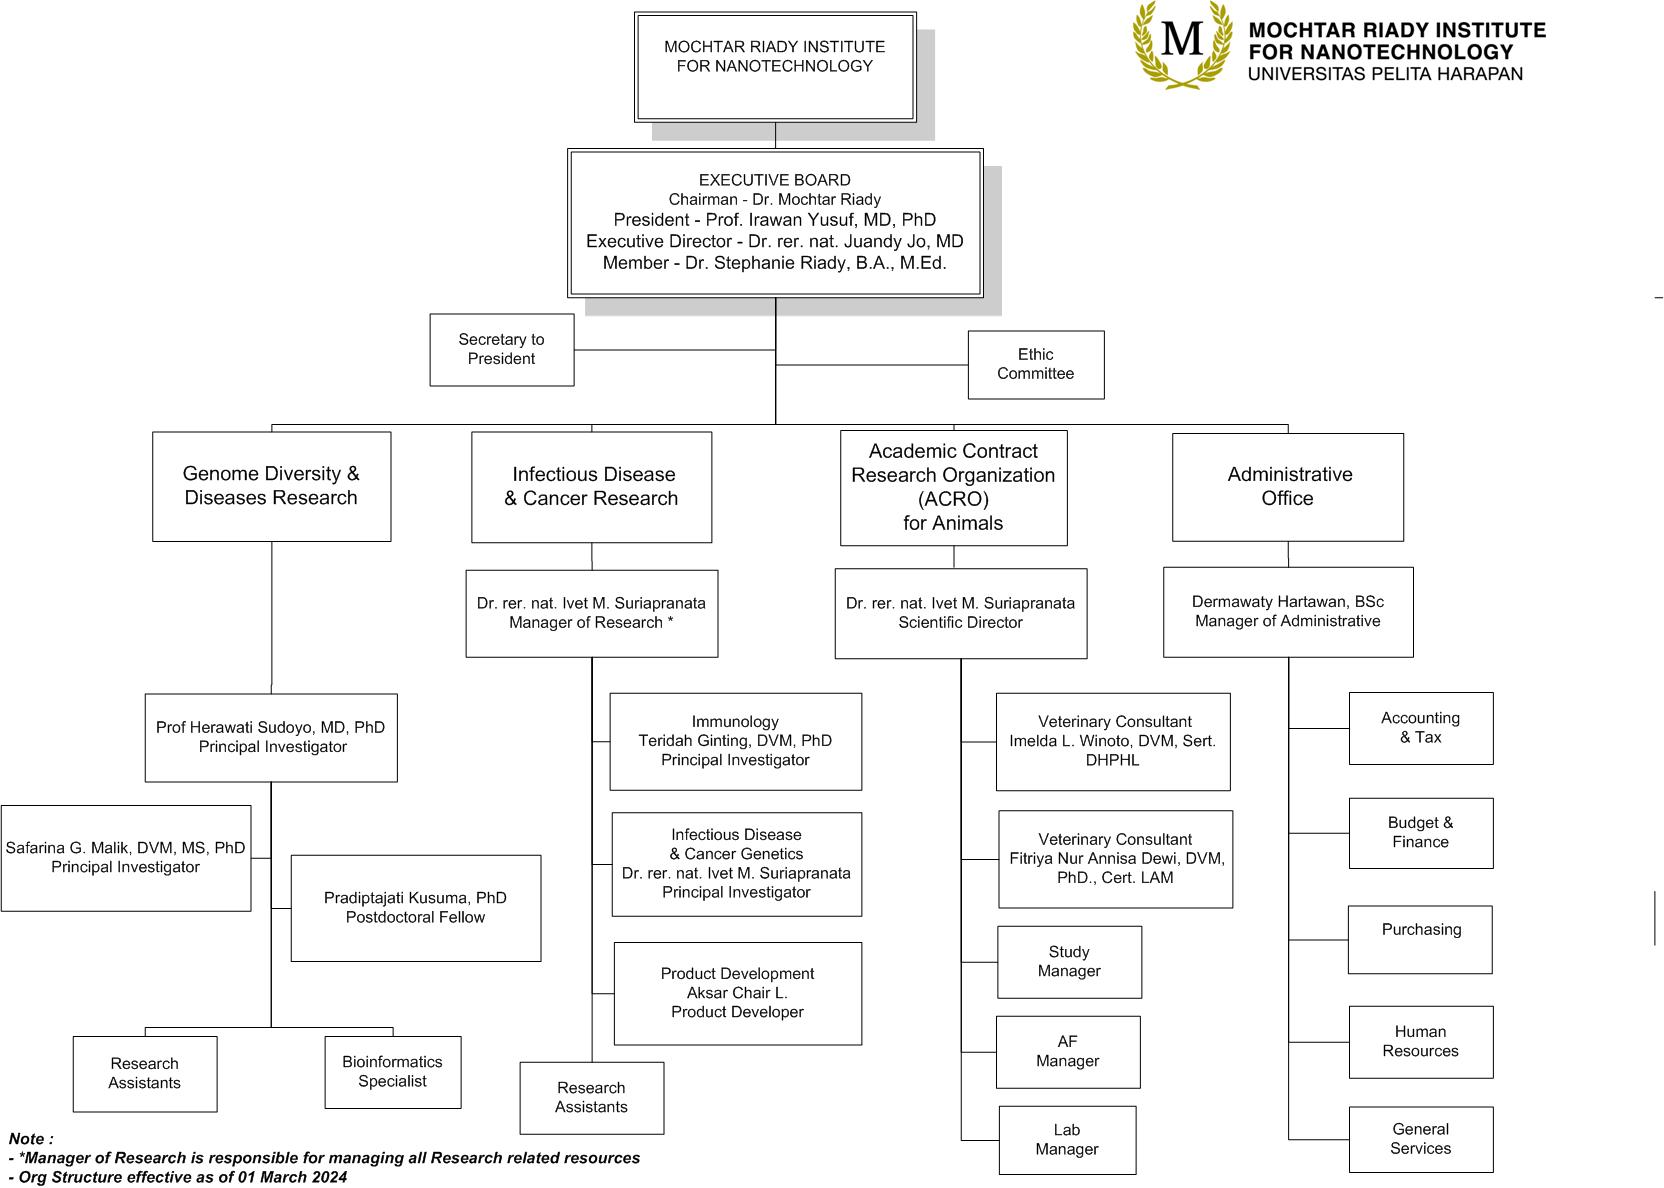 MRIN Org Chart.vsd (as of 01 March 2024)